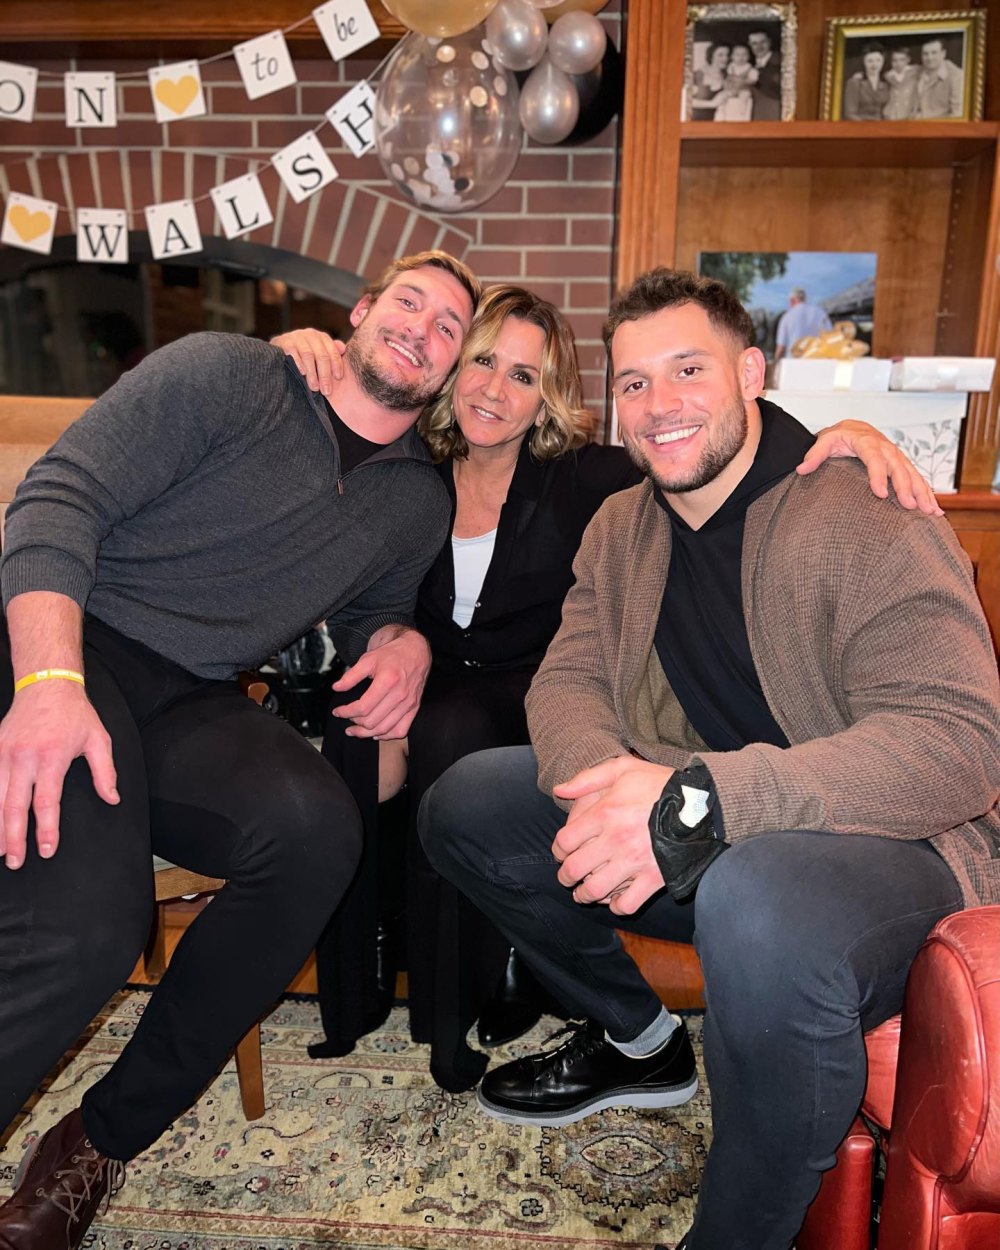 Nick Bosa of 49ers lets 'My mother' handle all ticket requests for the Super Bowl: 'I don't deal with that'